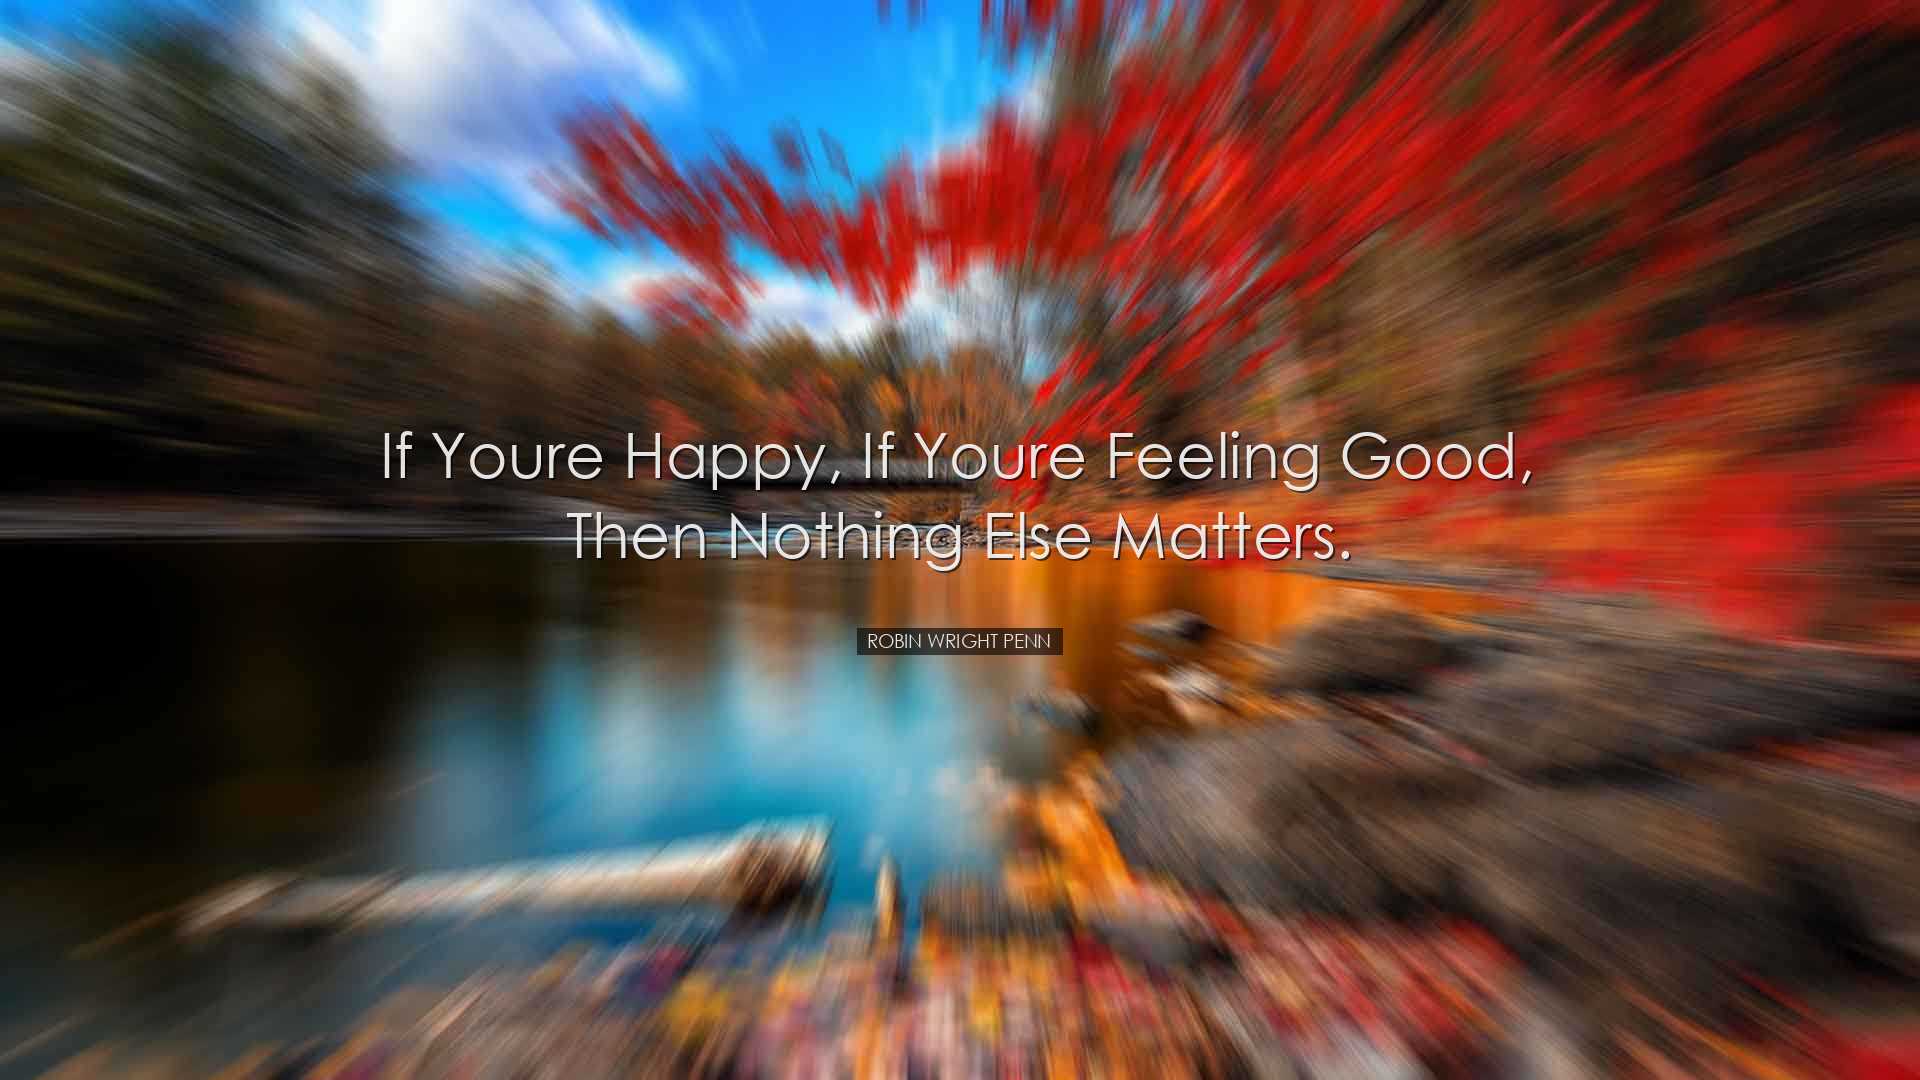 If youre happy, if youre feeling good, then nothing else matters.